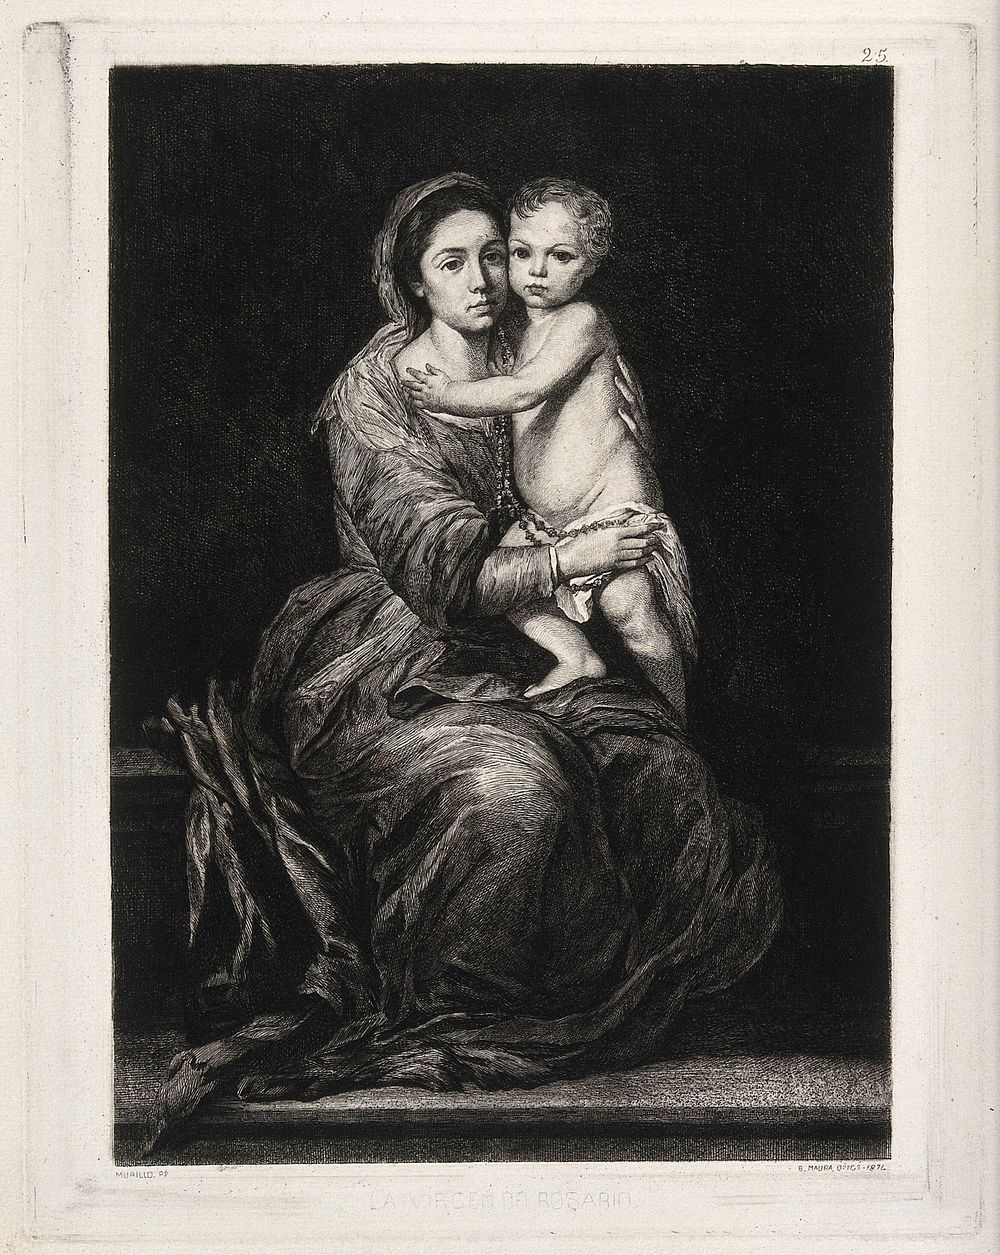 Saint Mary (the Blessed Virgin) with the Christ Child. Etching by B. Maura y Montaner, 1874, after B.E. Murillo.